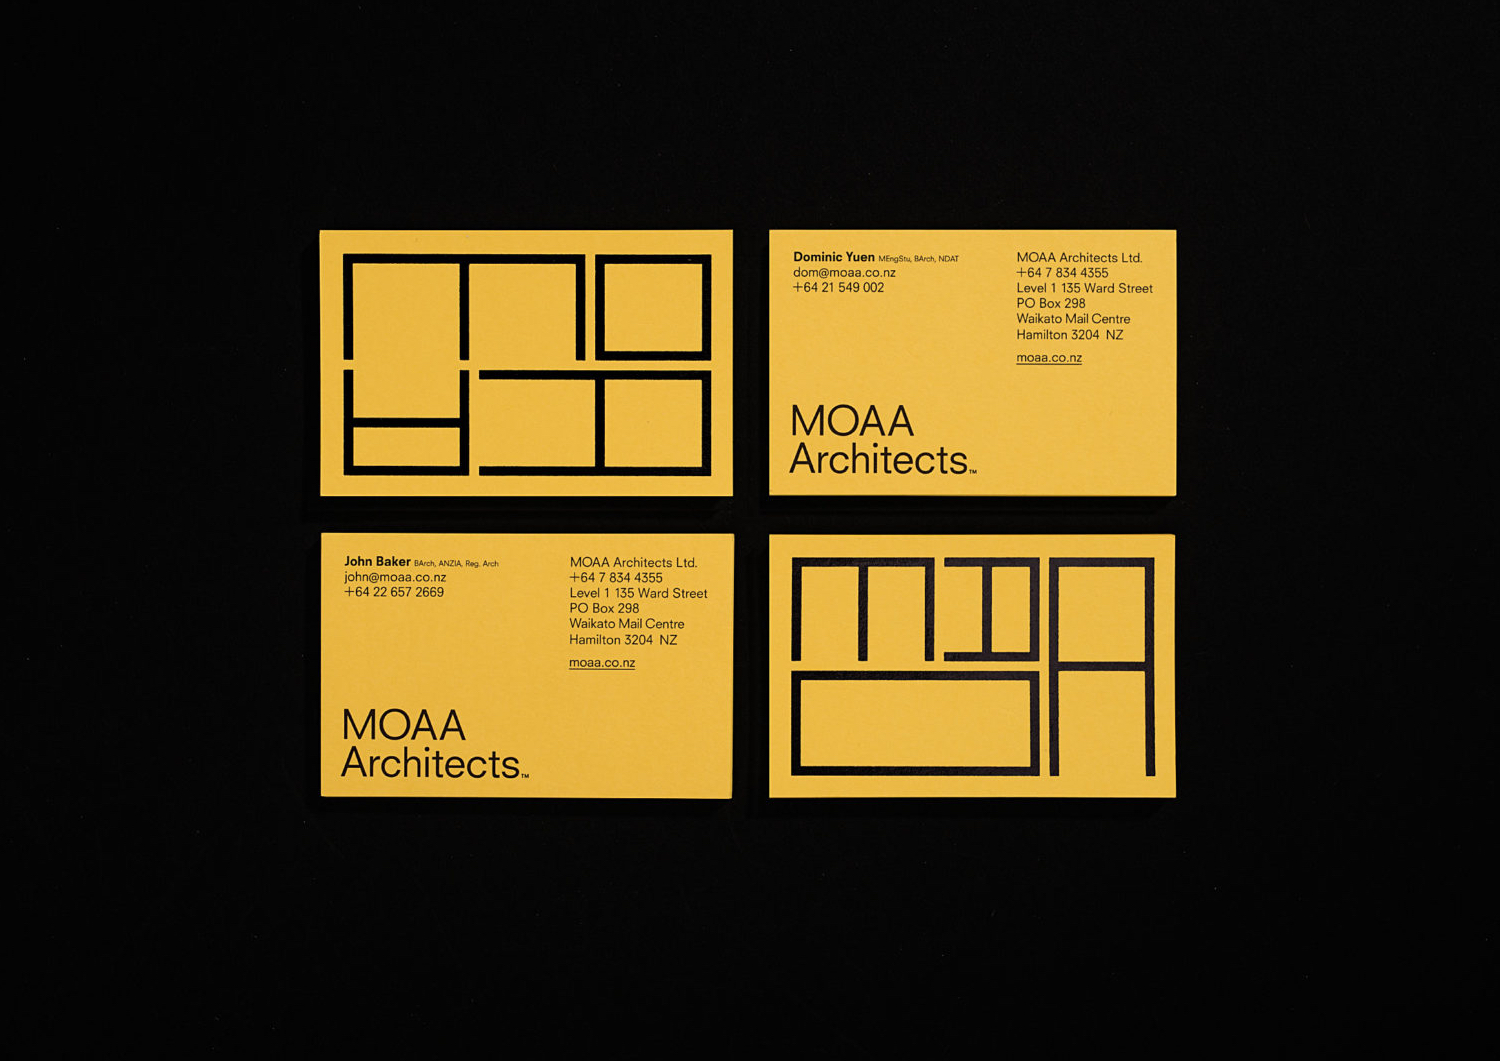 The Best Business Cards Designs of 2017 – MOAA Architects by Inhouse, New Zealand